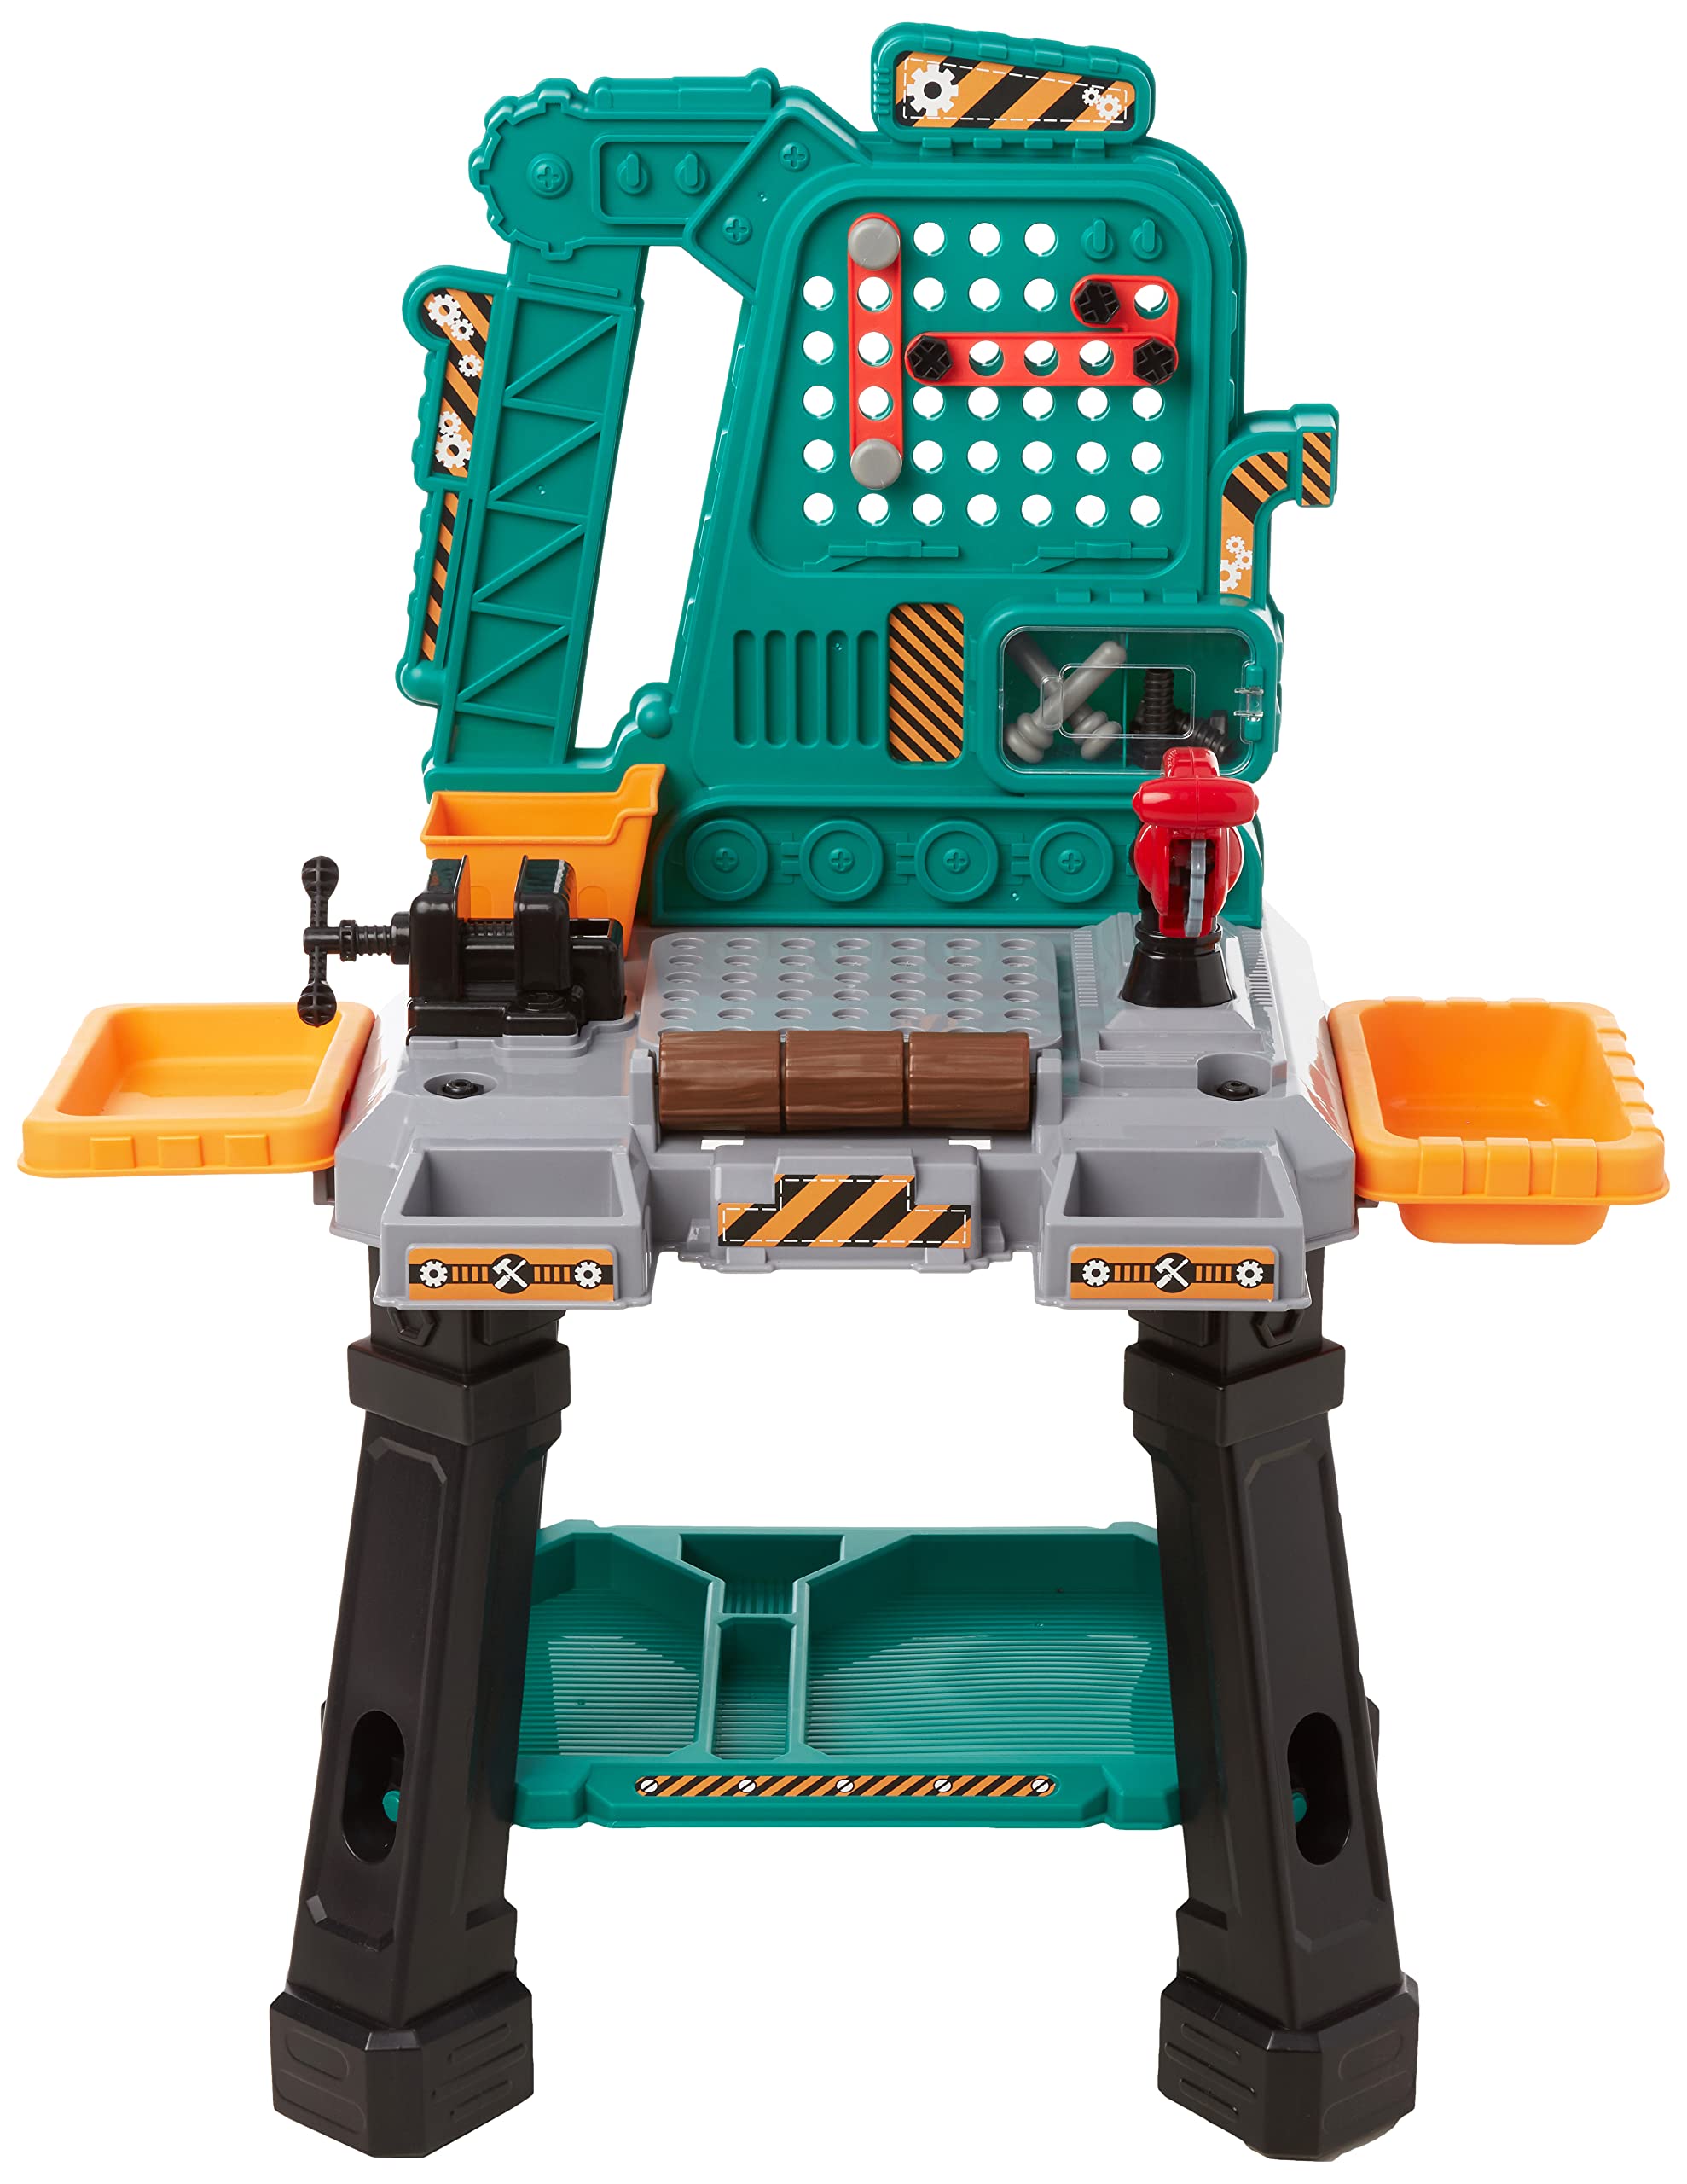 80-Piece Amazon Basics Kids Workbench Construction Playset w/ Play Tools & Accessories $20.70 + Free S&H w/ Prime or $25+